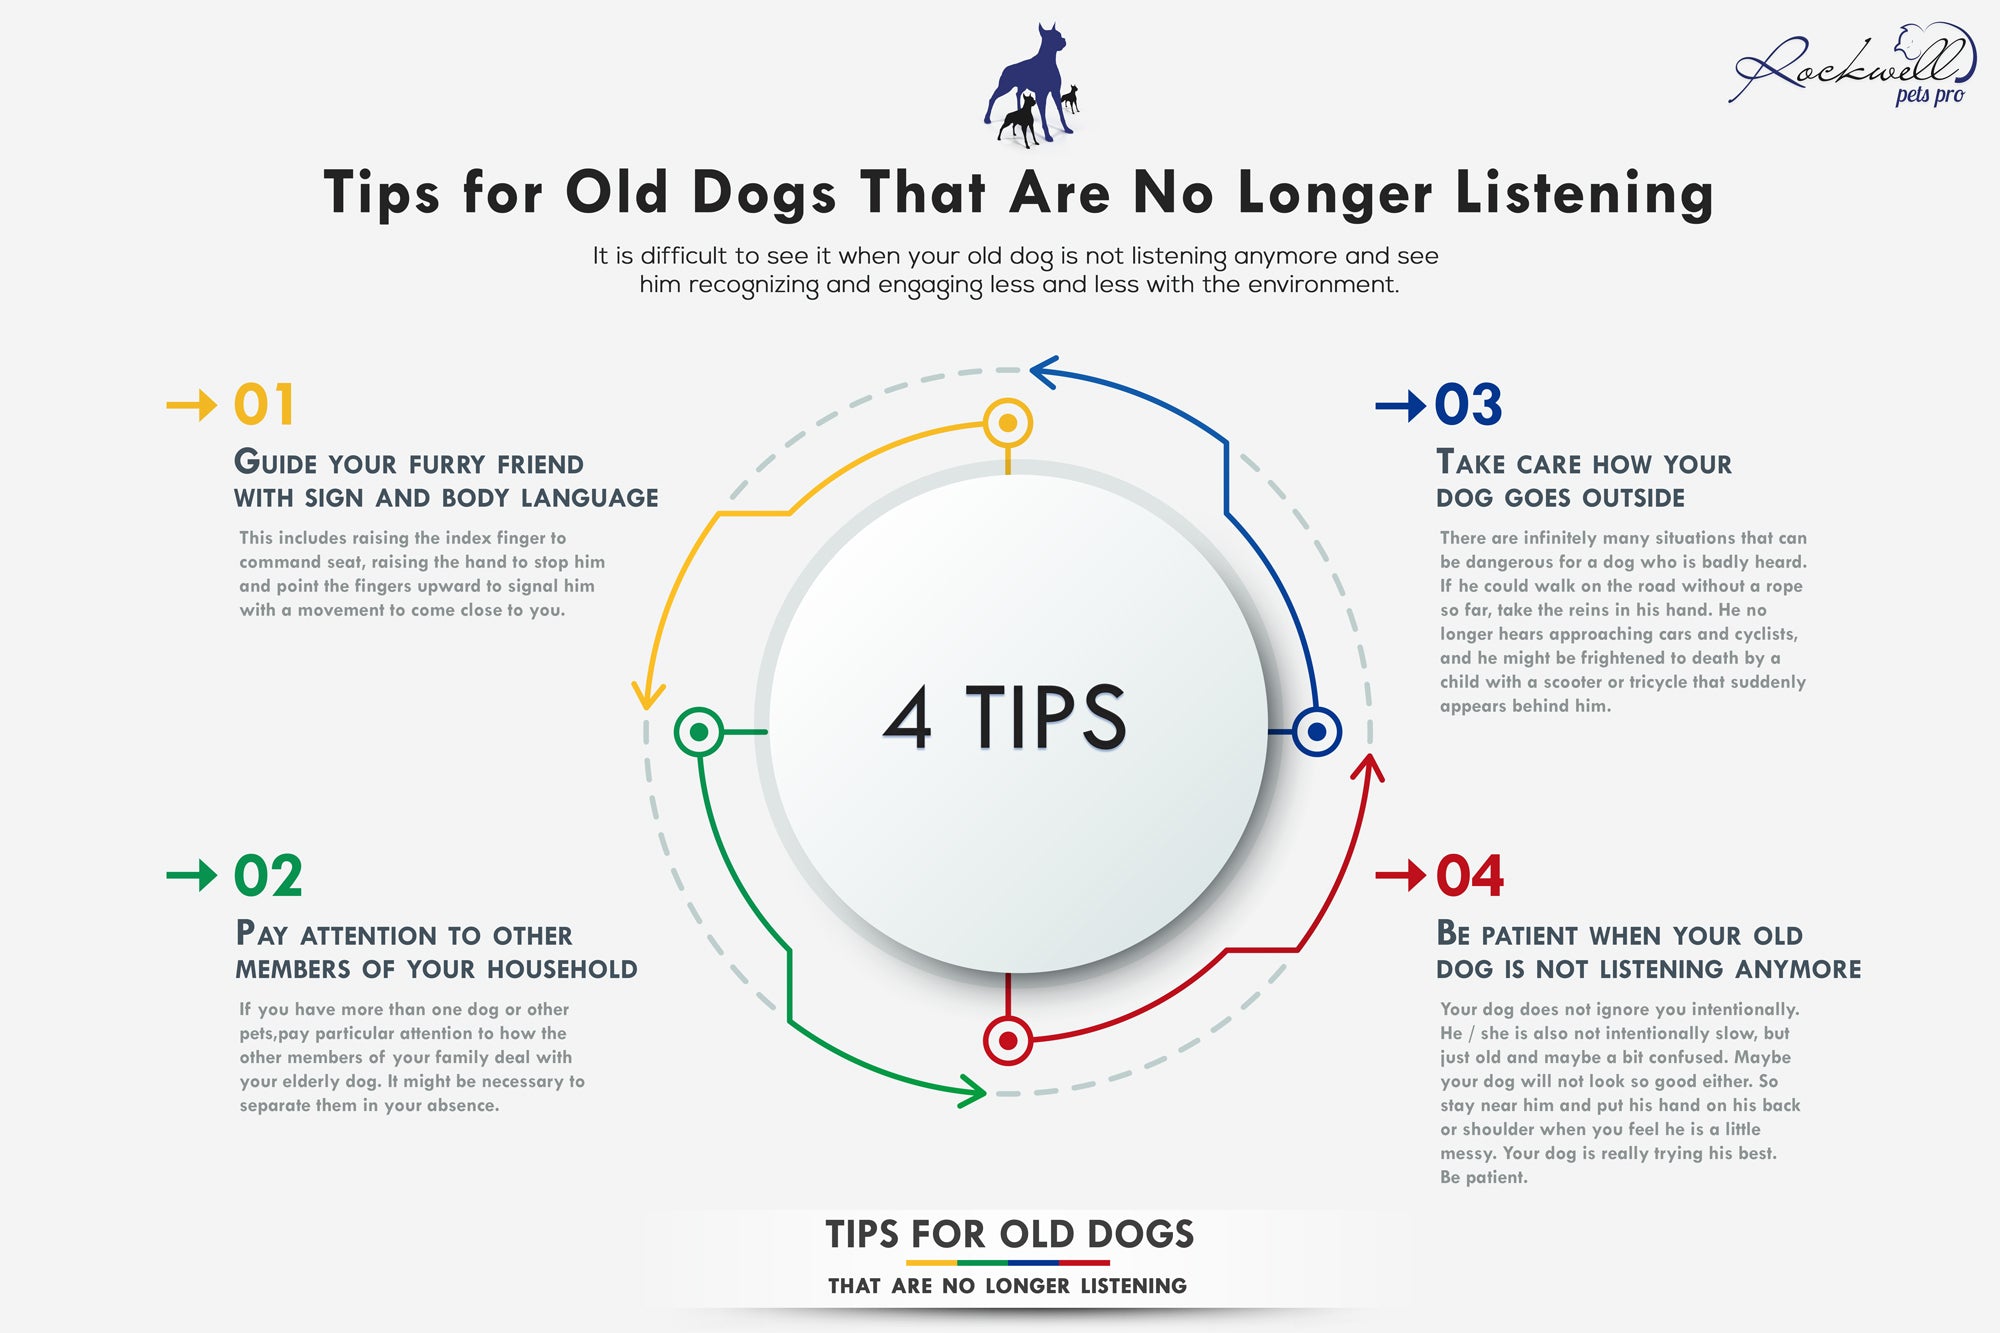 Tips For Old Dogs That Are No Longer Listening